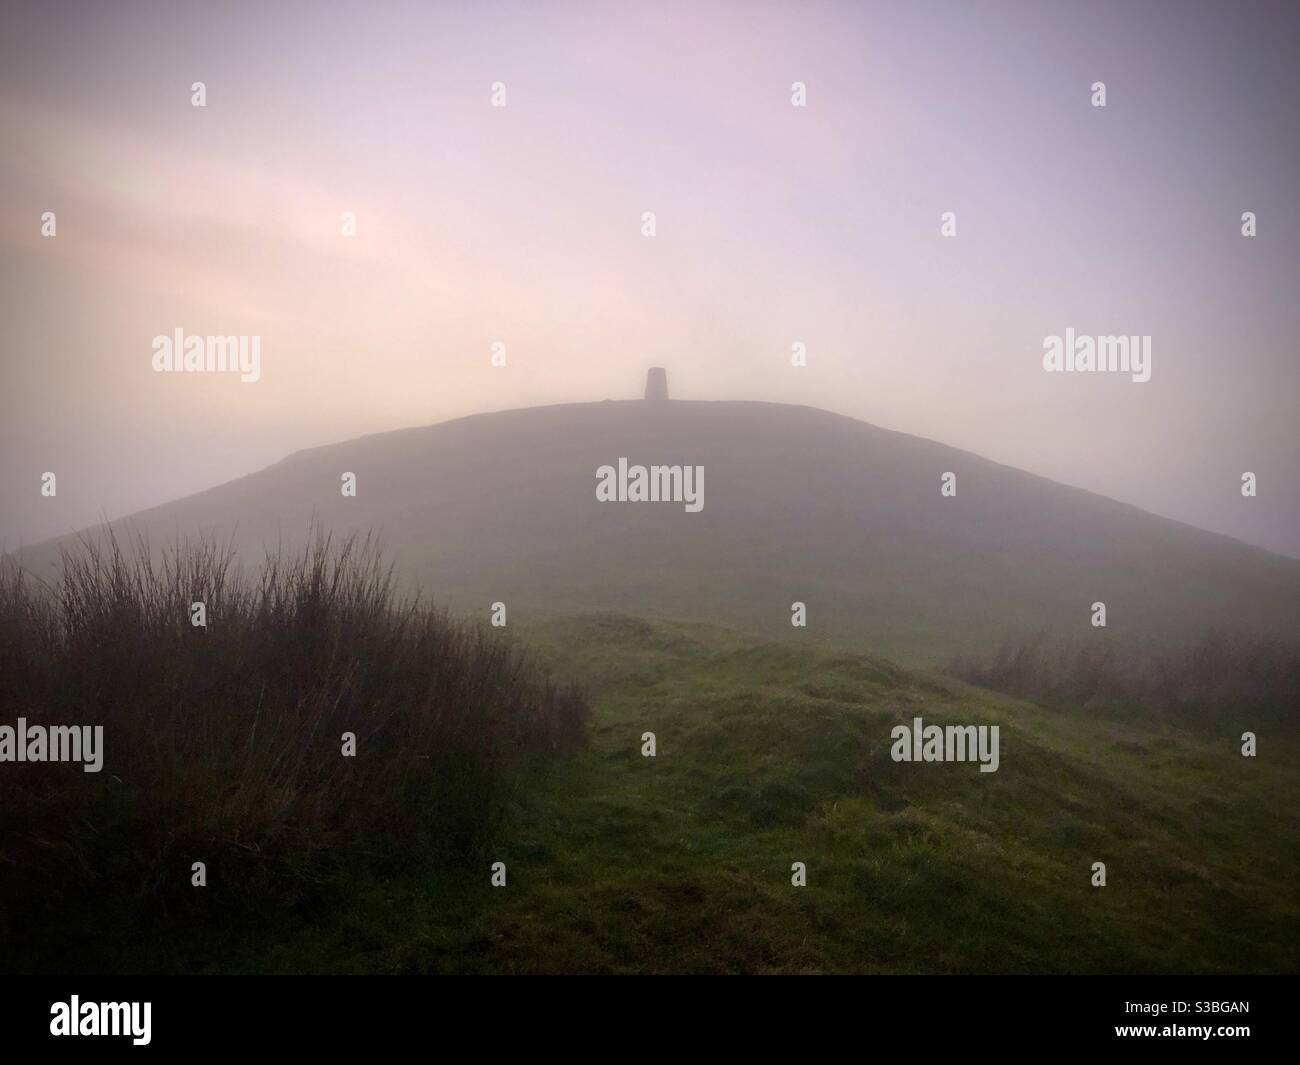 The peak of the Garth mountain shrouded in mist, Cardiff, South Wales in late November. Stock Photo